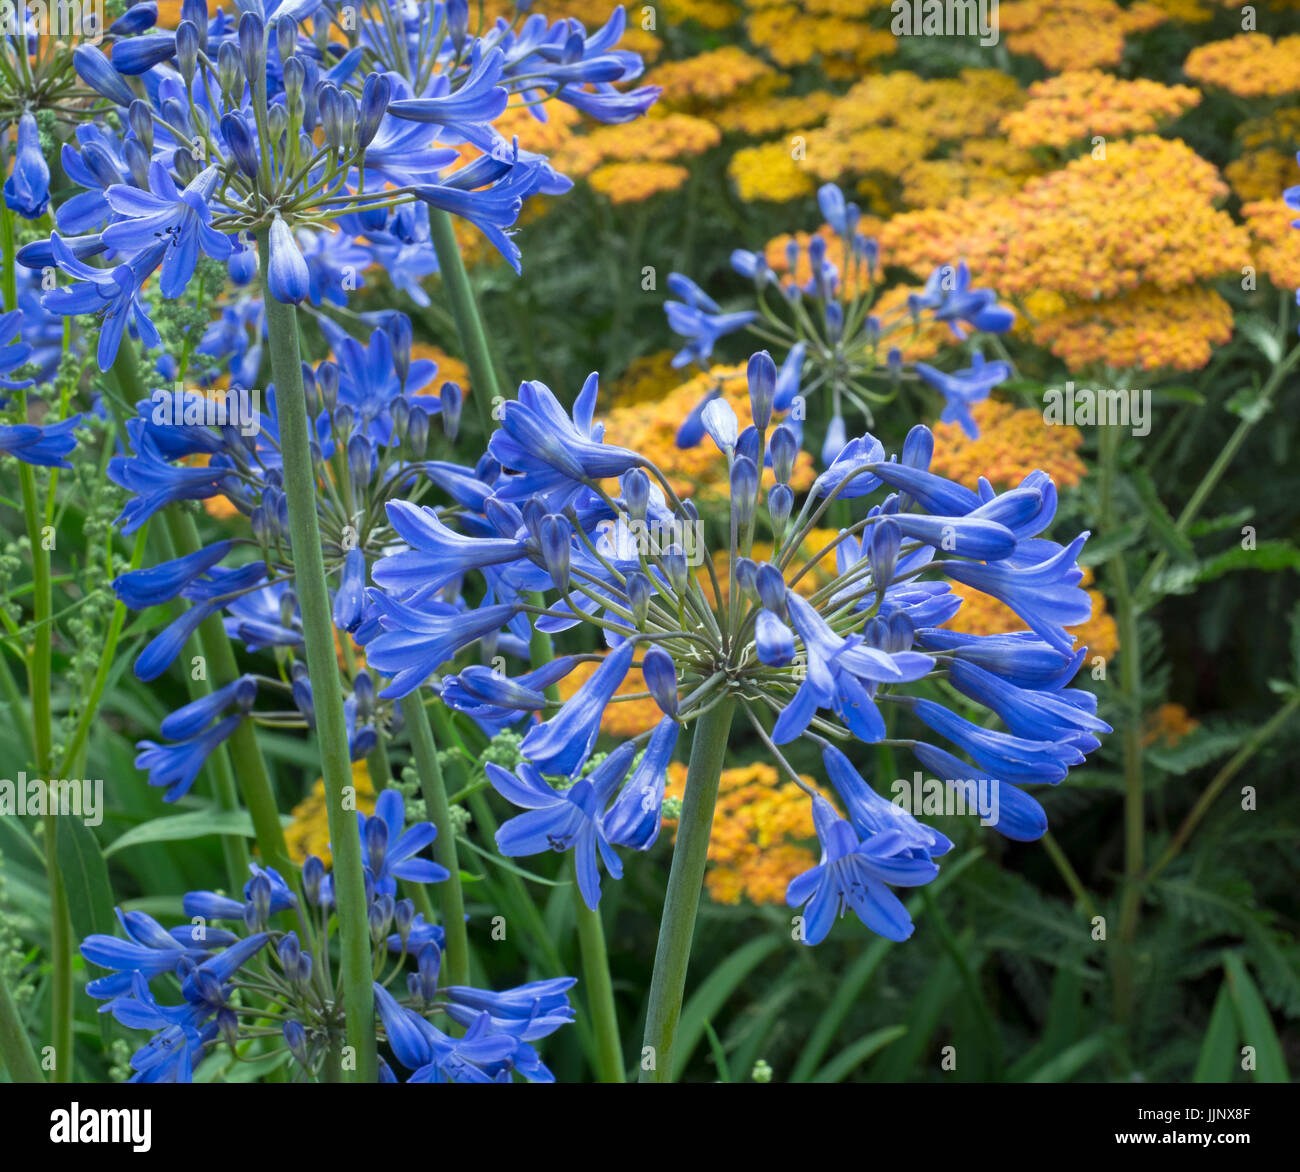 Achillea ' Terra cotta’ in flower with Agapanthus Colbolt blue Stock Photo